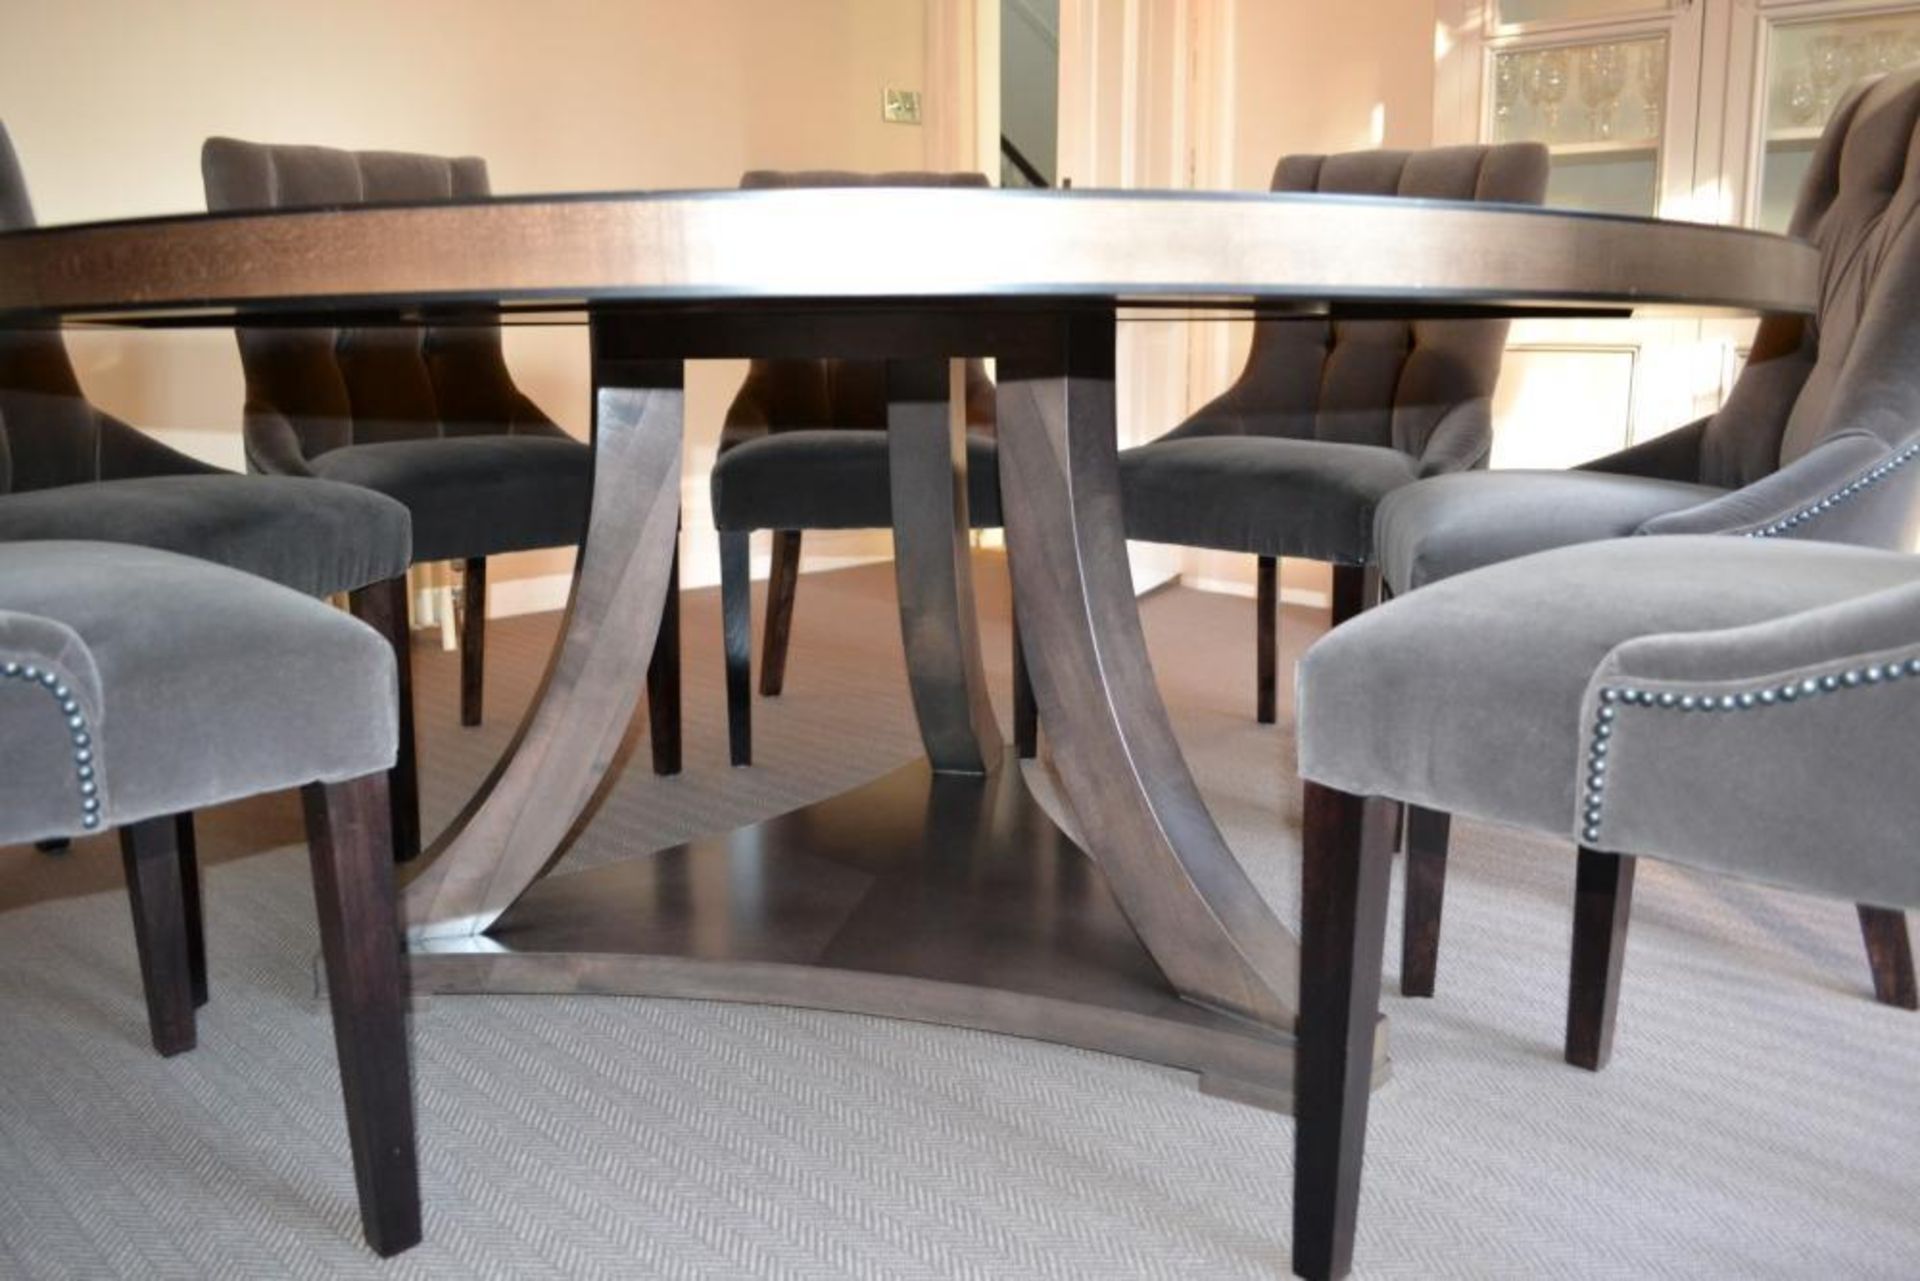 1 x Bespoke Round Dining Table With Sycamore Wood Finish - 1800mm Diameter - Ideal For Family Gather - Image 2 of 14